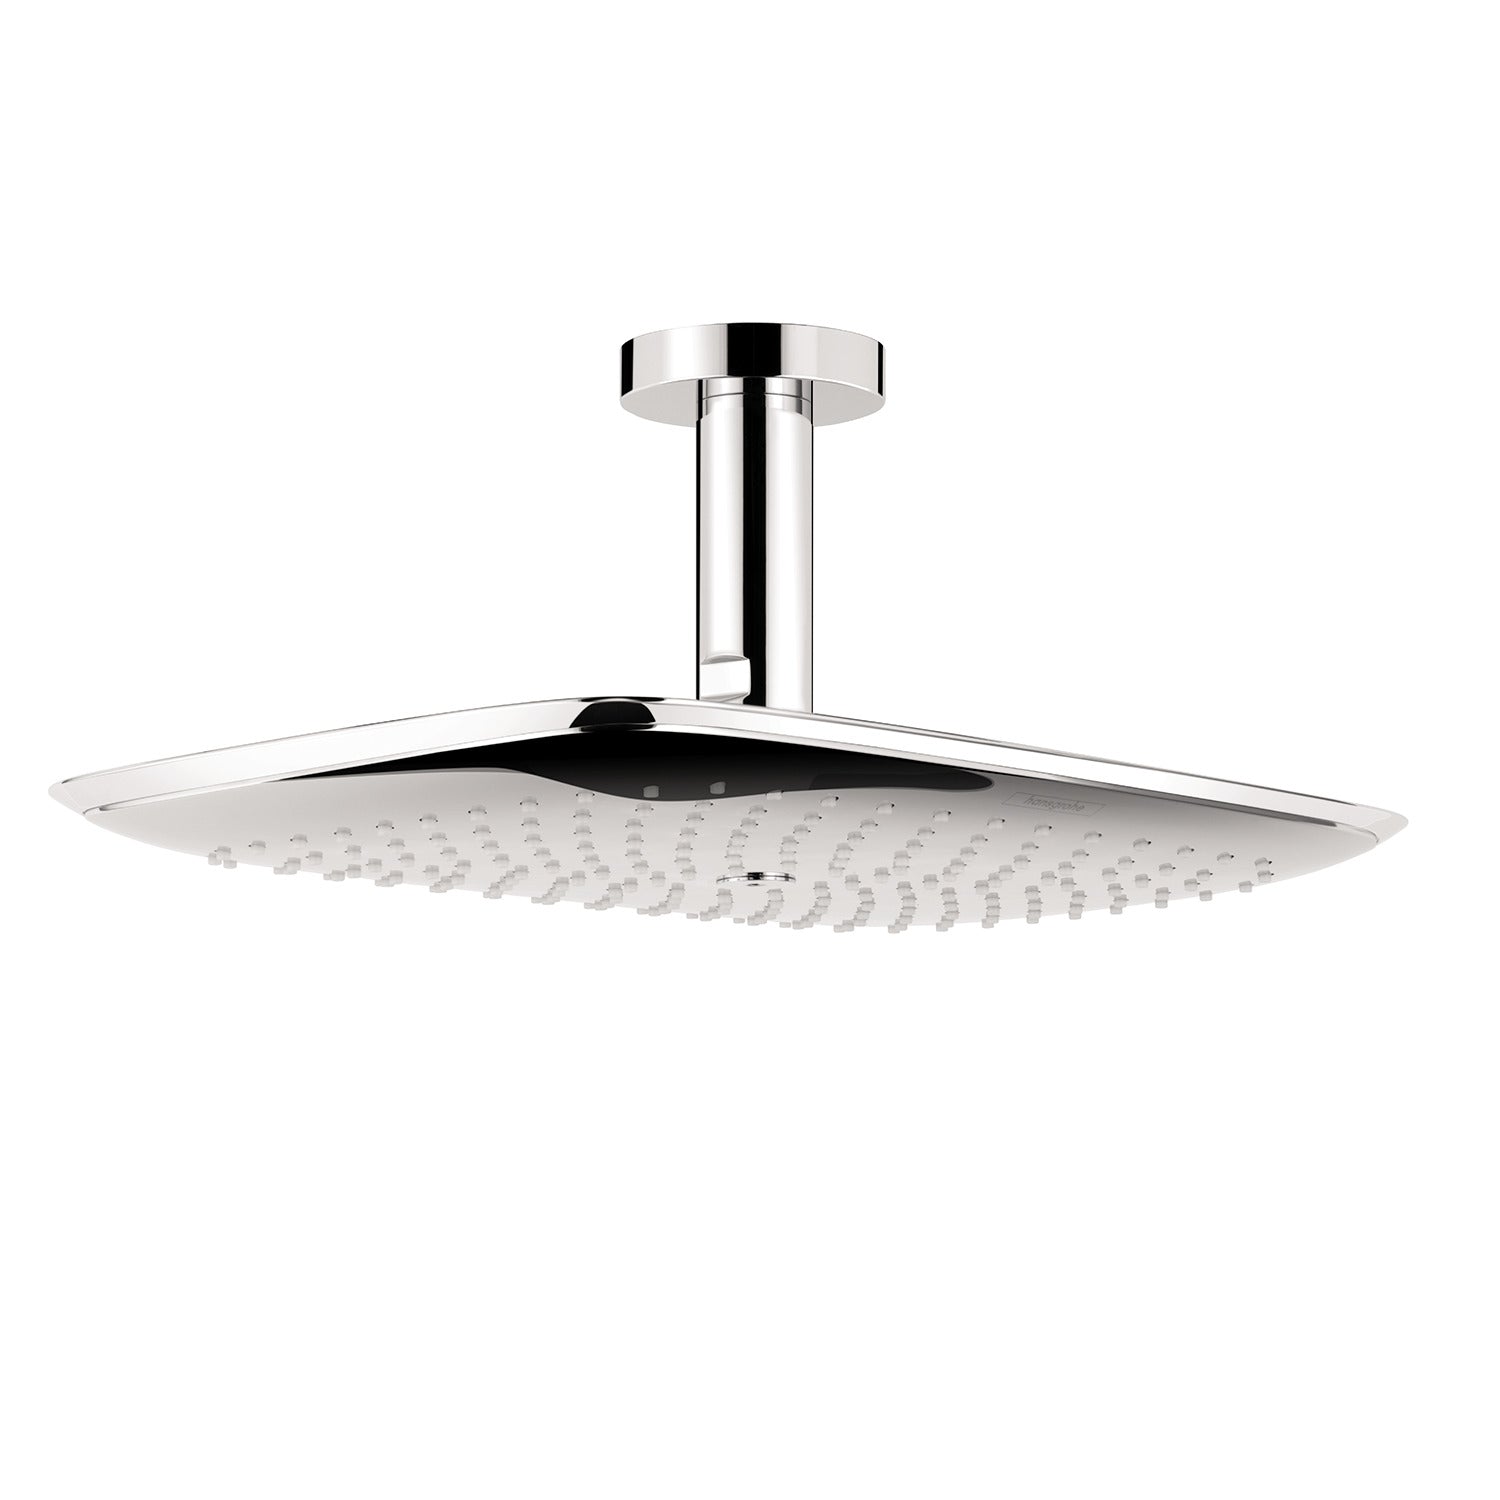 HANSGROHE 27390001 PuraVida Showerhead 400 1-Jet with Ceiling Mount, 2.5 GPM in Chrome